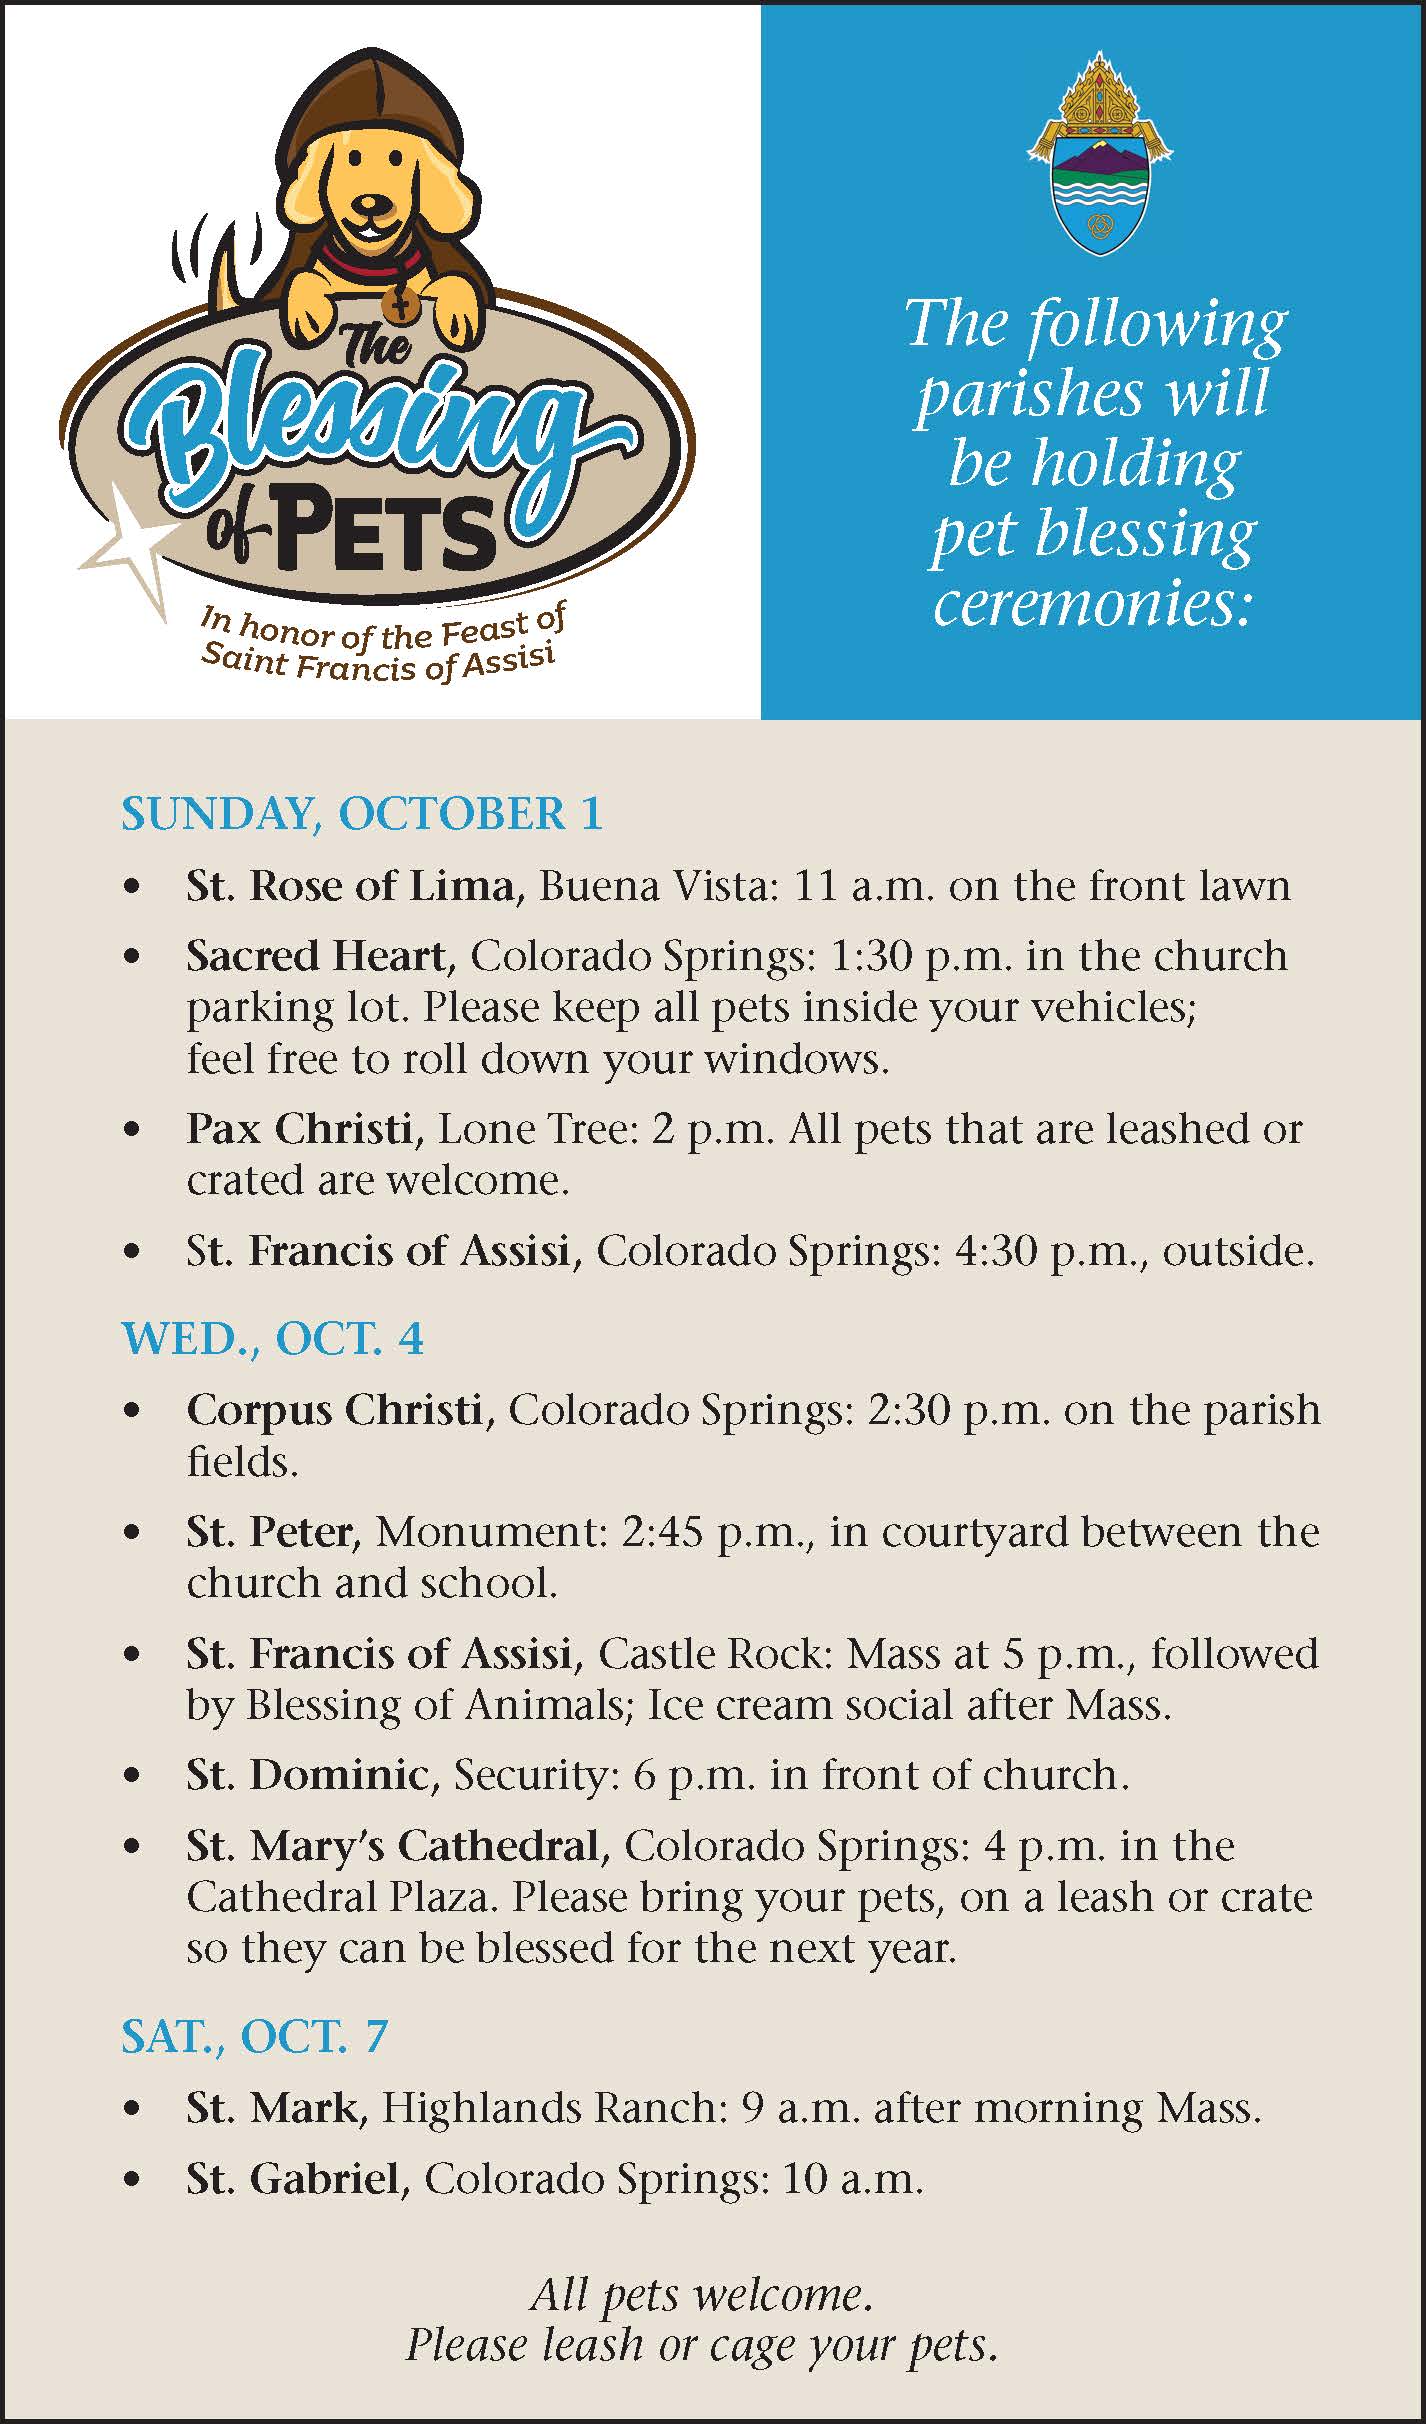 Pet Blessings Across the Diocese